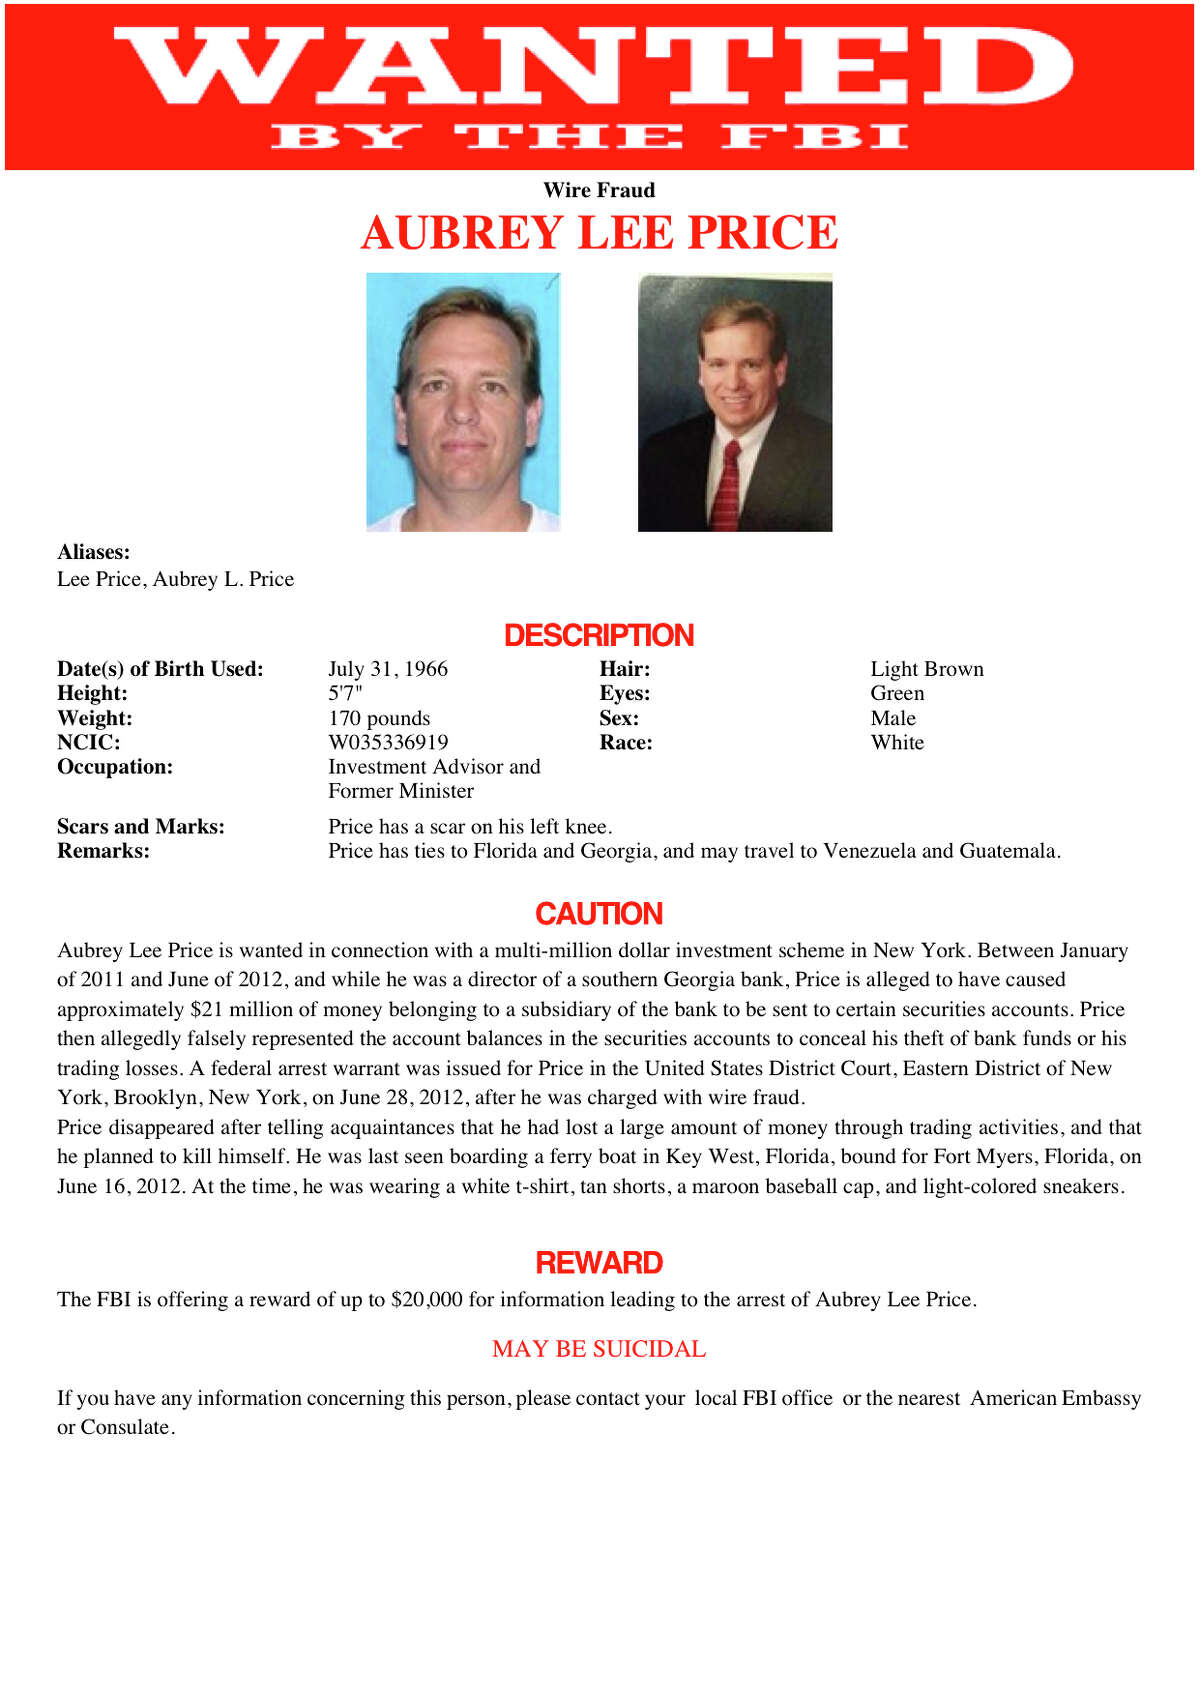 Price's appearance had changed considerably from the clean-cut image seen on his FBI wanted poster.